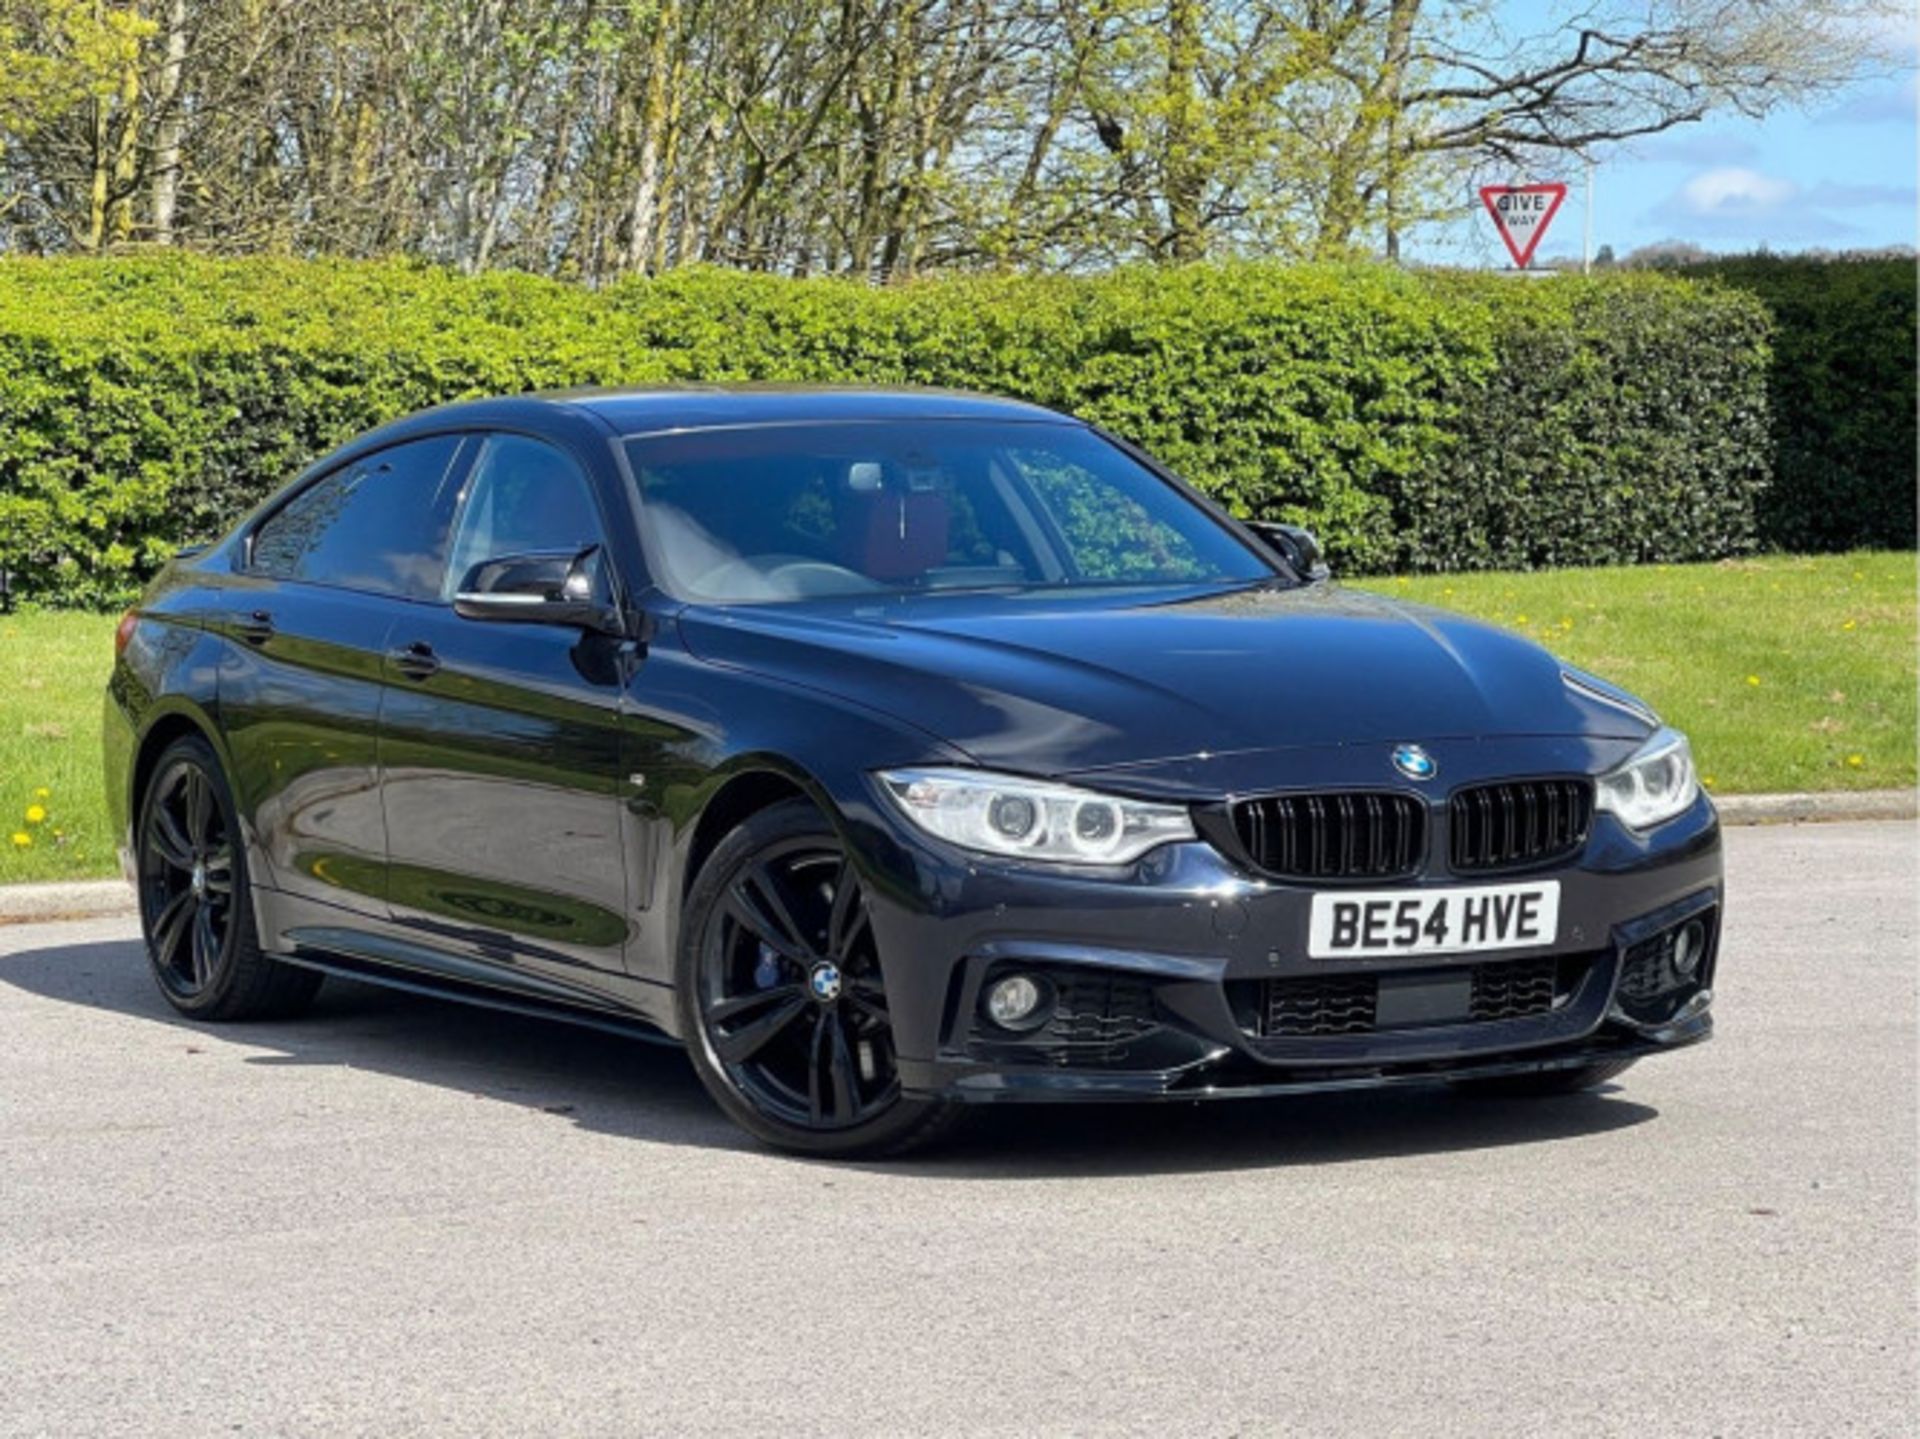 BMW 4 SERIES GRAN COUPE 3.0 430D M SPORT AUTO XDRIVE EURO 6 (S/S) 5DR (2016) - Image 3 of 73